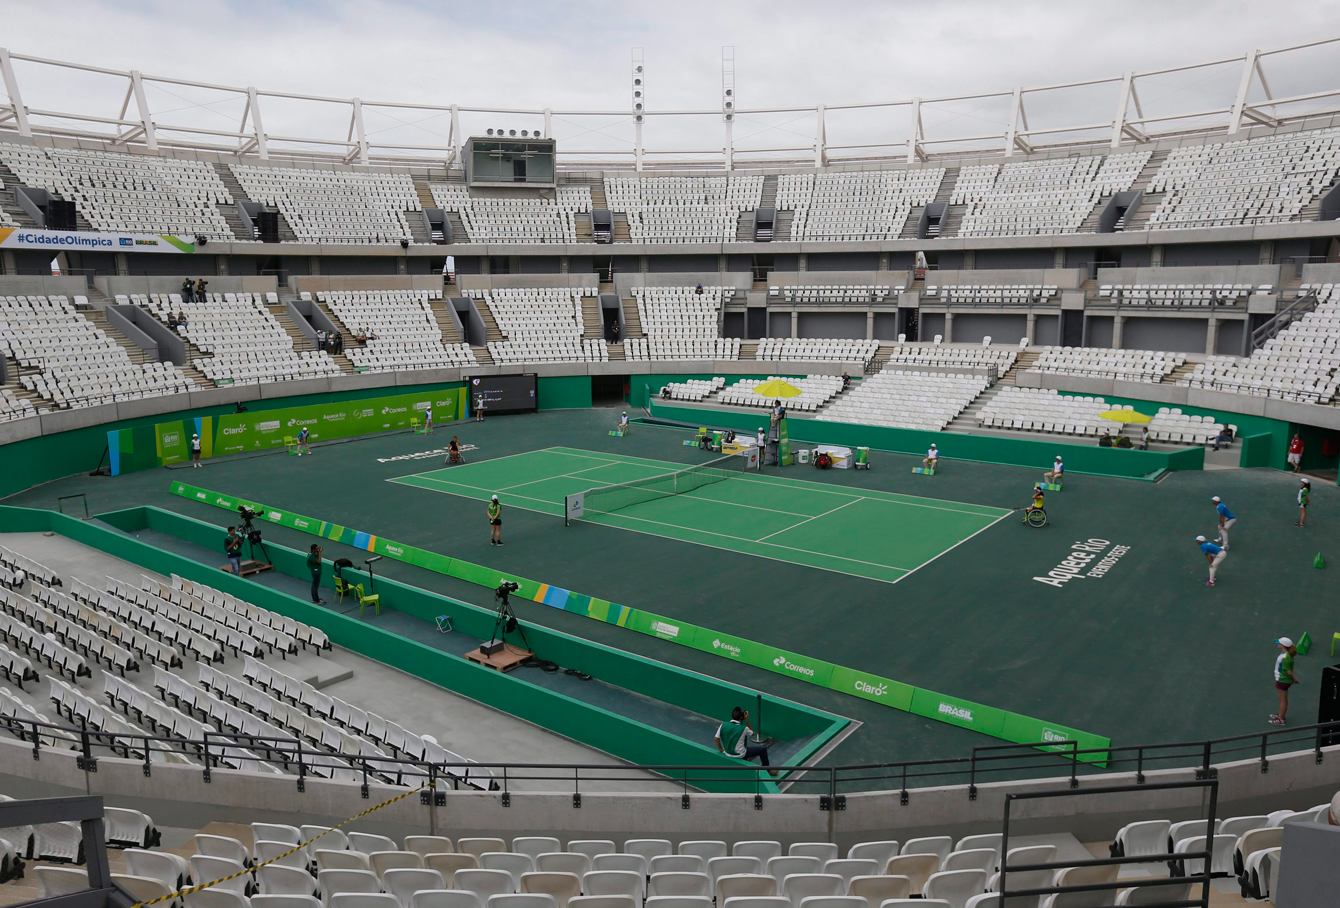 Brazil's Paralympic athletes compete during the tennis test event at Olympics Tennis Center. (Photo: AP/Silvia Izquierdo)